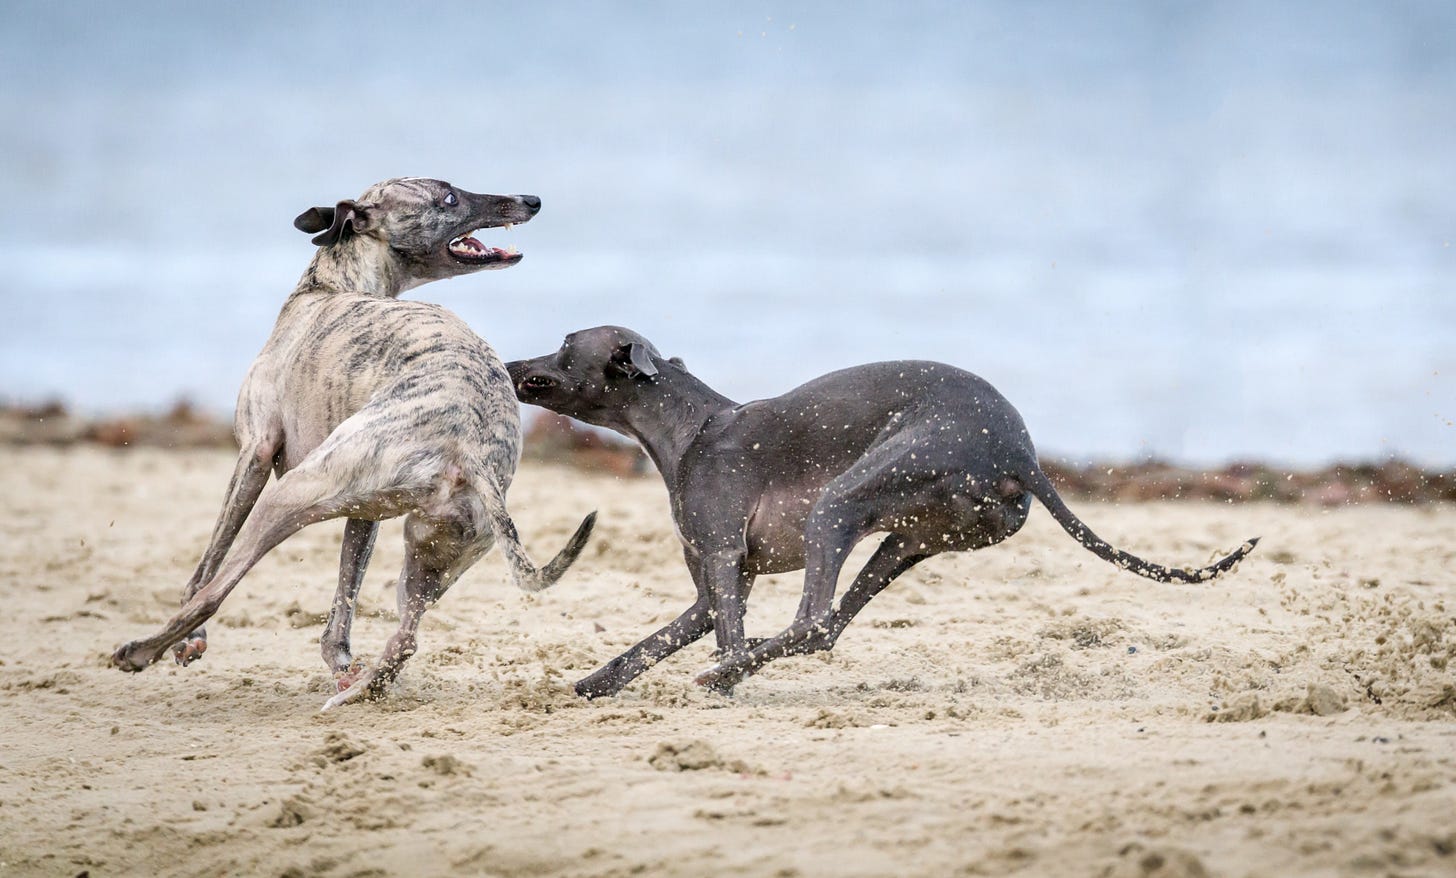 image of two greyhounds chasing on the beech for article by Larry G. Maguire